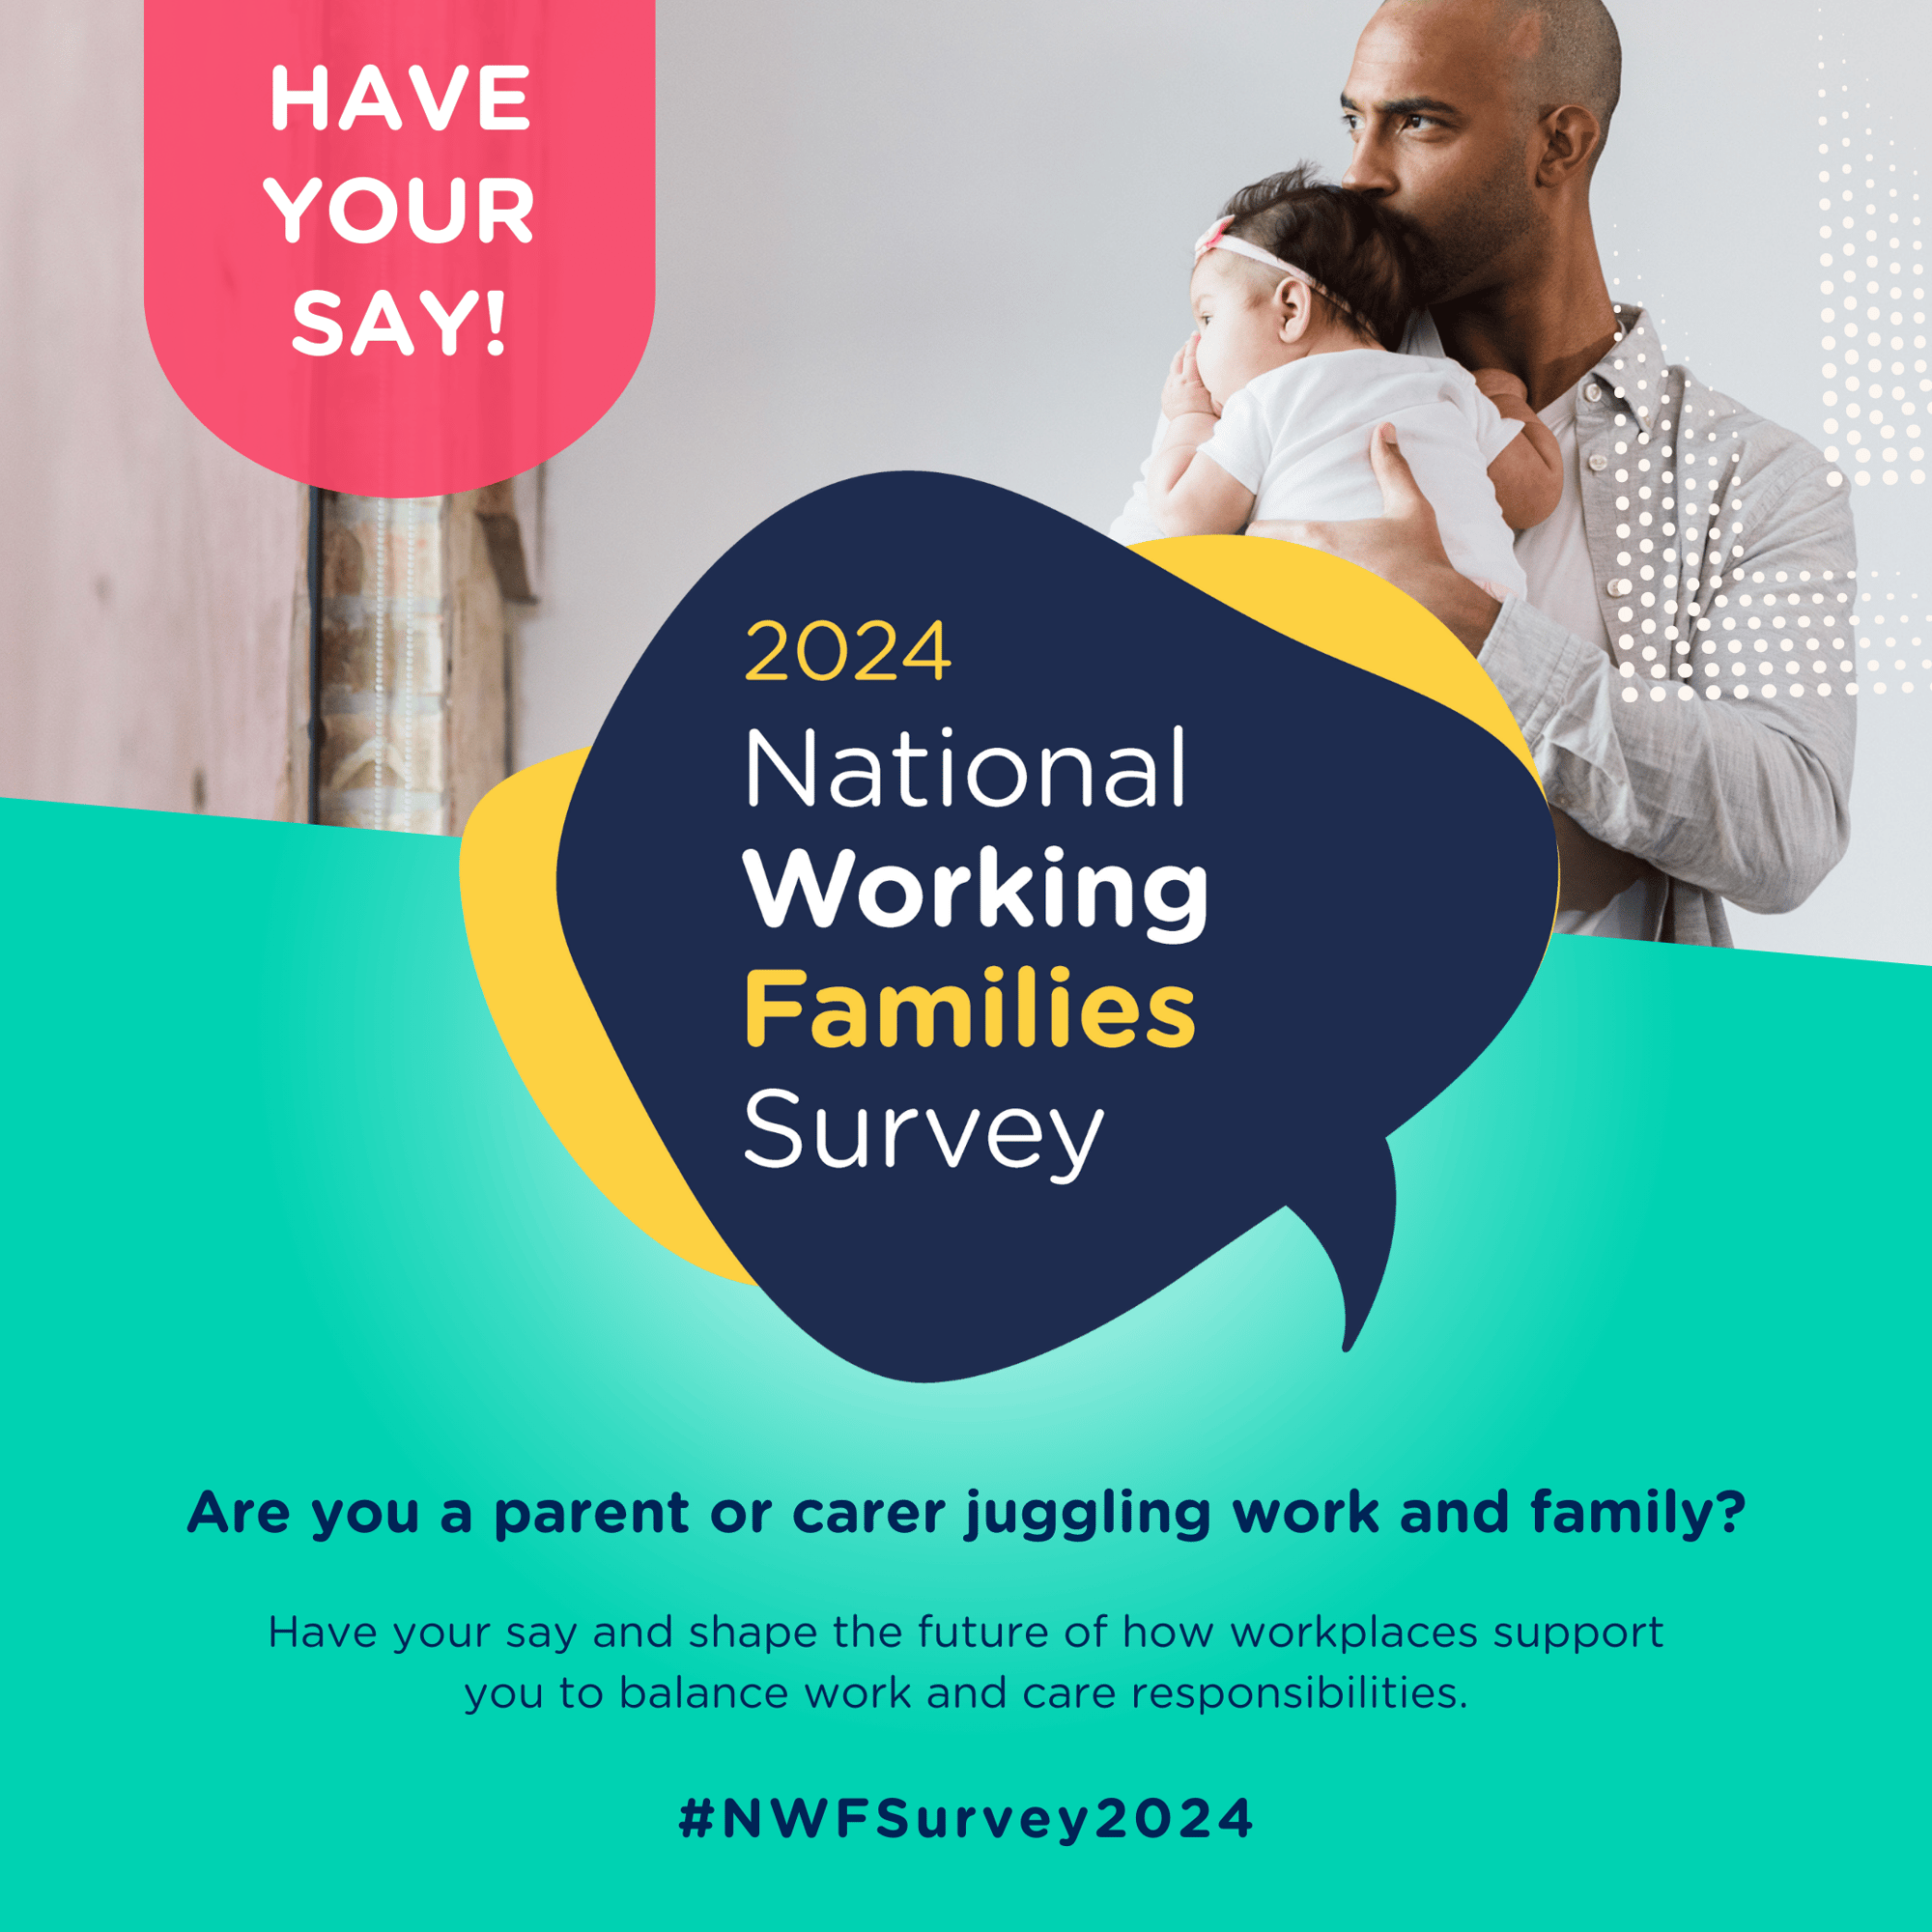 4. Have your say - New Dad